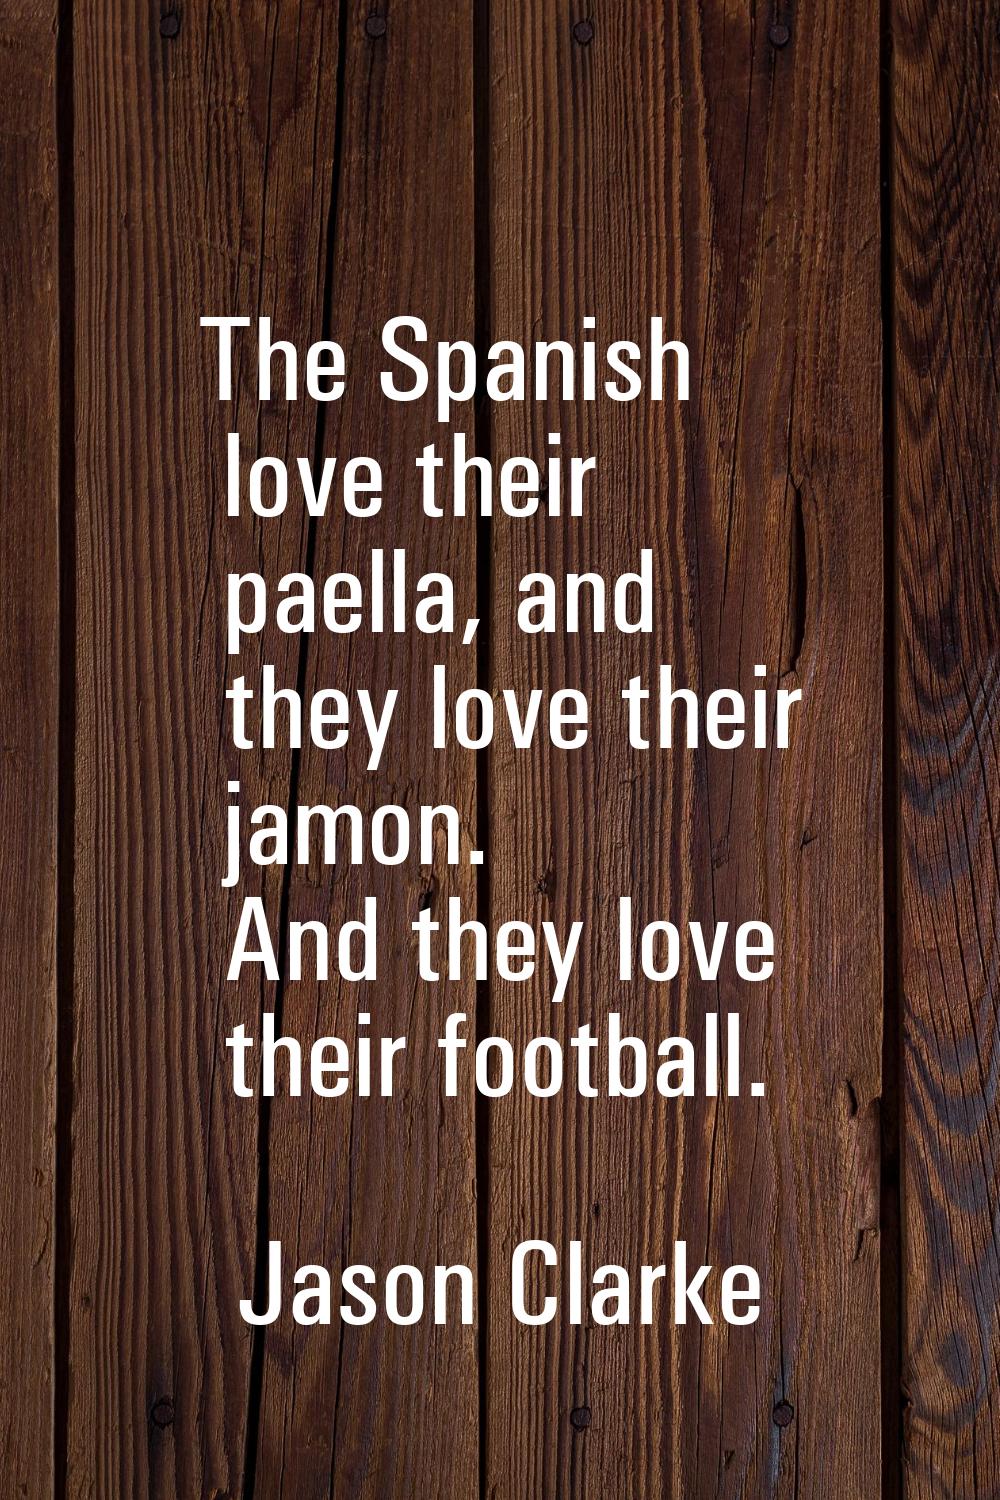 The Spanish love their paella, and they love their jamon. And they love their football.